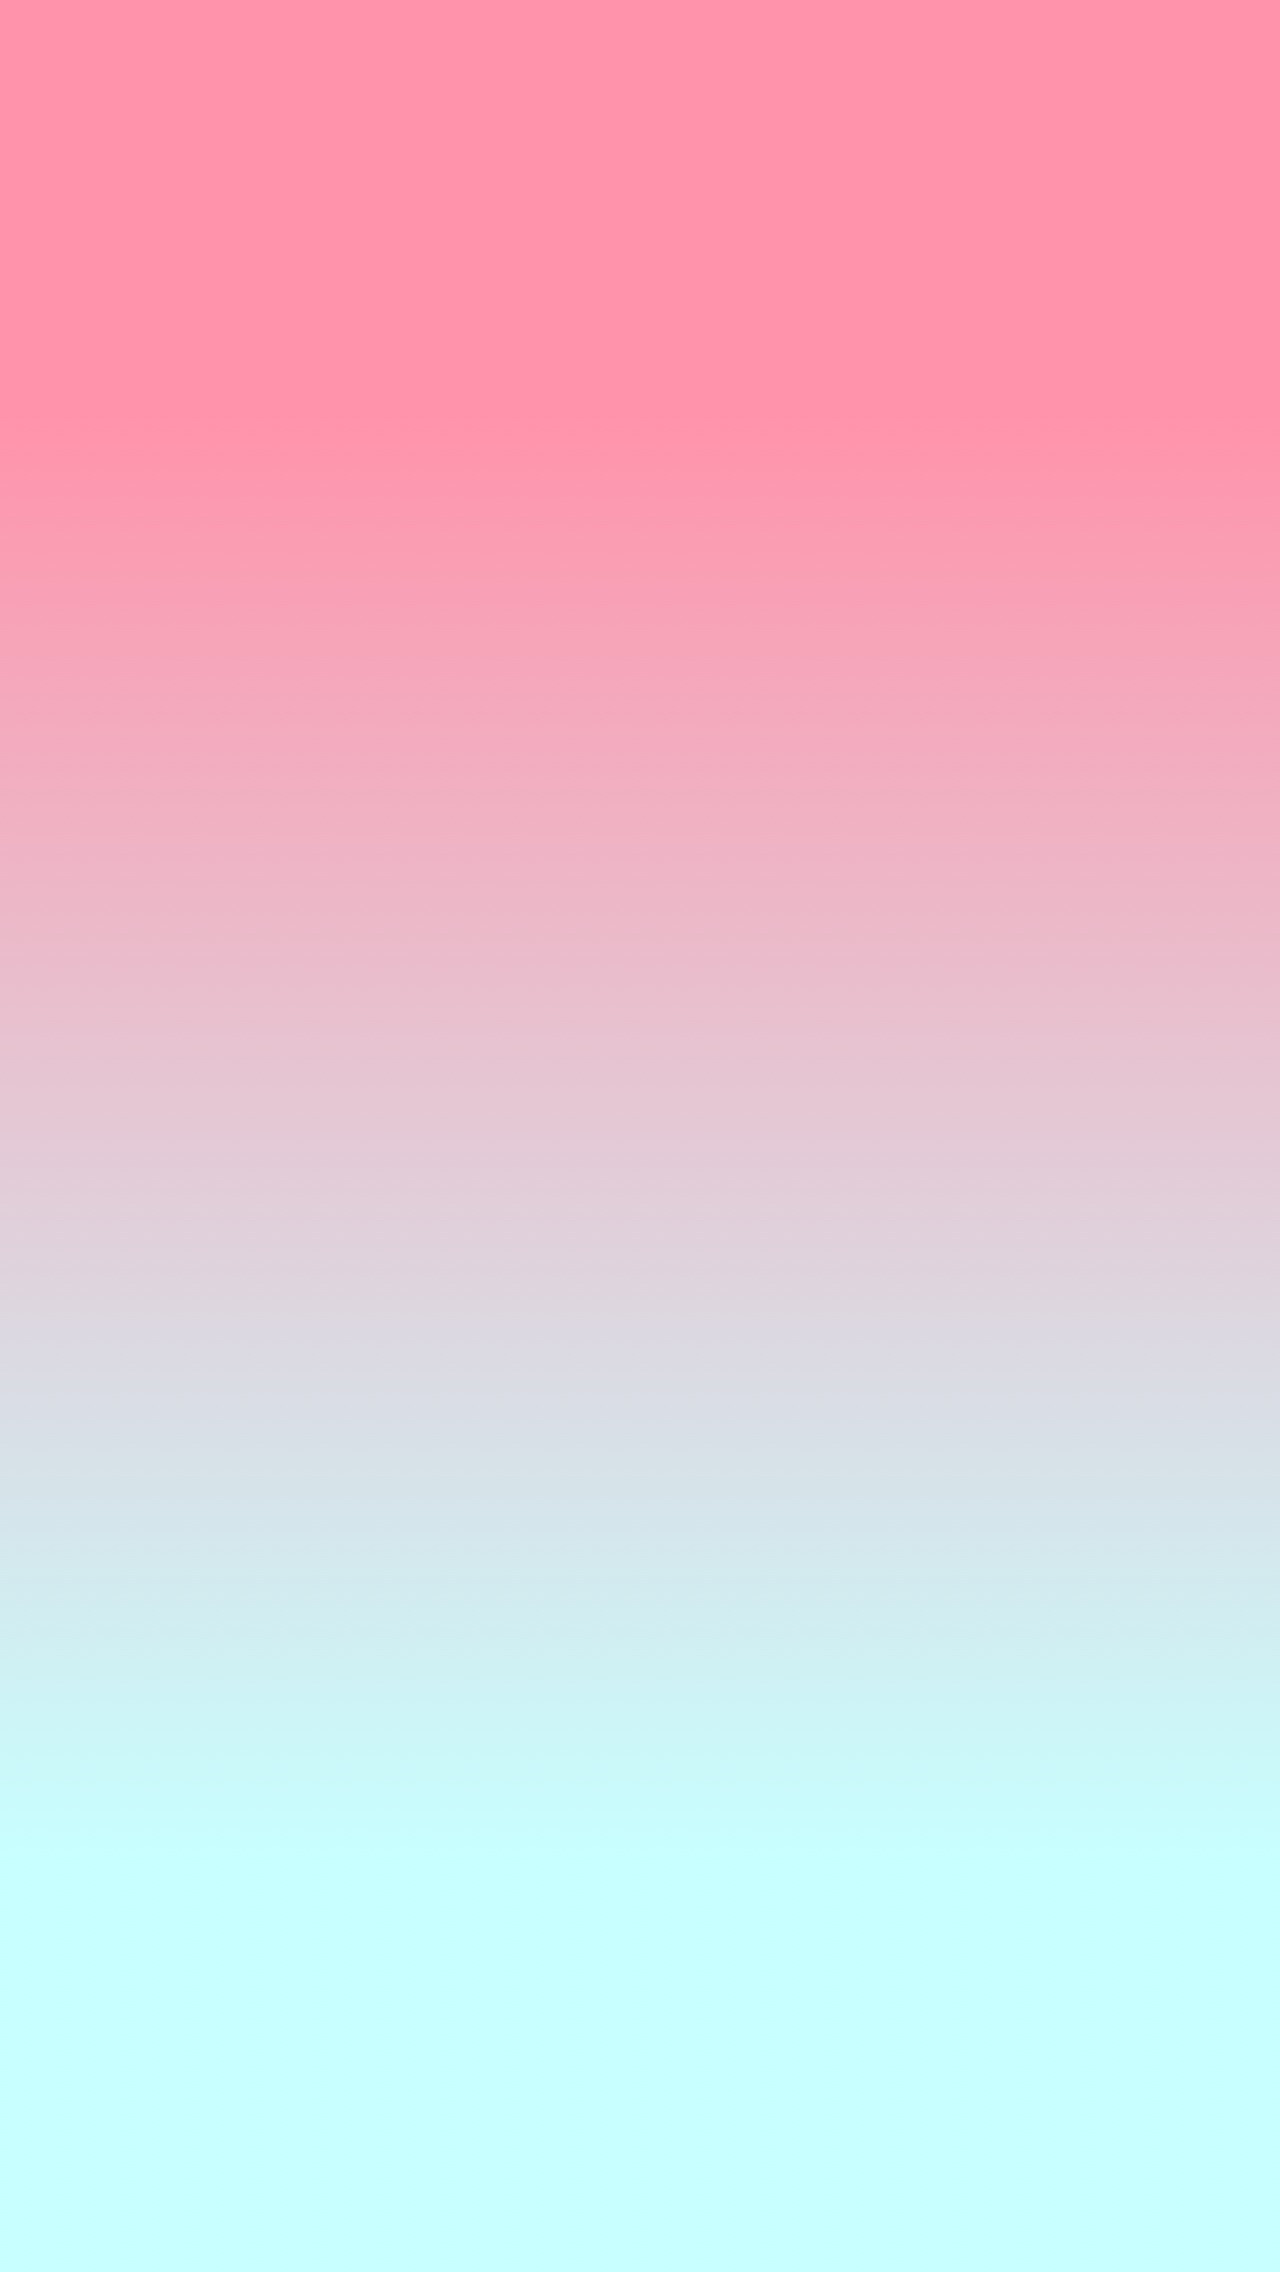 Pink and blue ombre iphone wallpaper